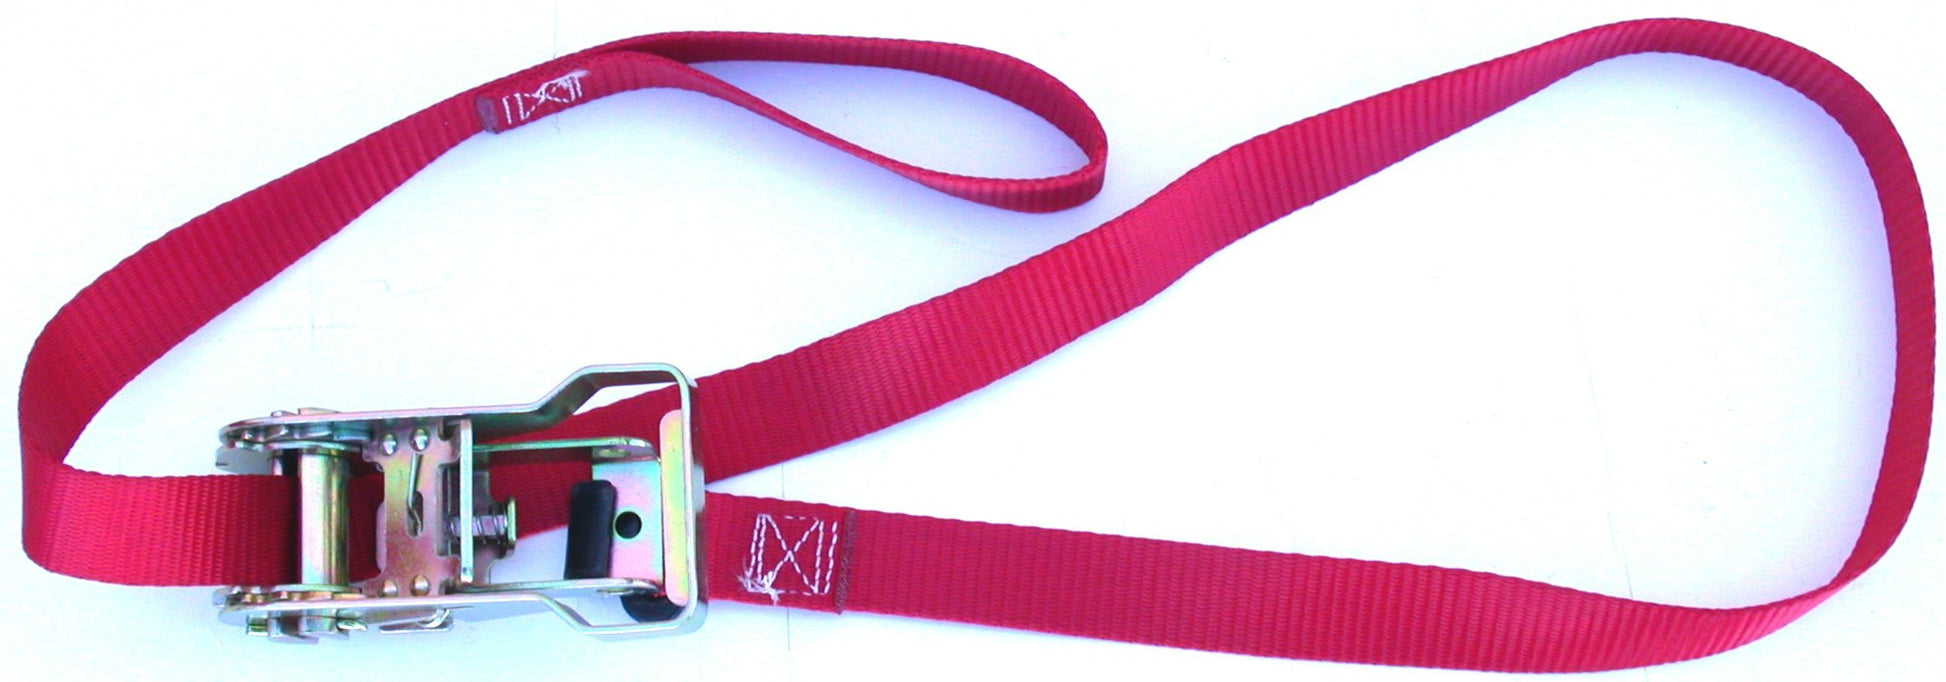 8L-red 1-inch webbing ratchet-buckle bottom net cable strap